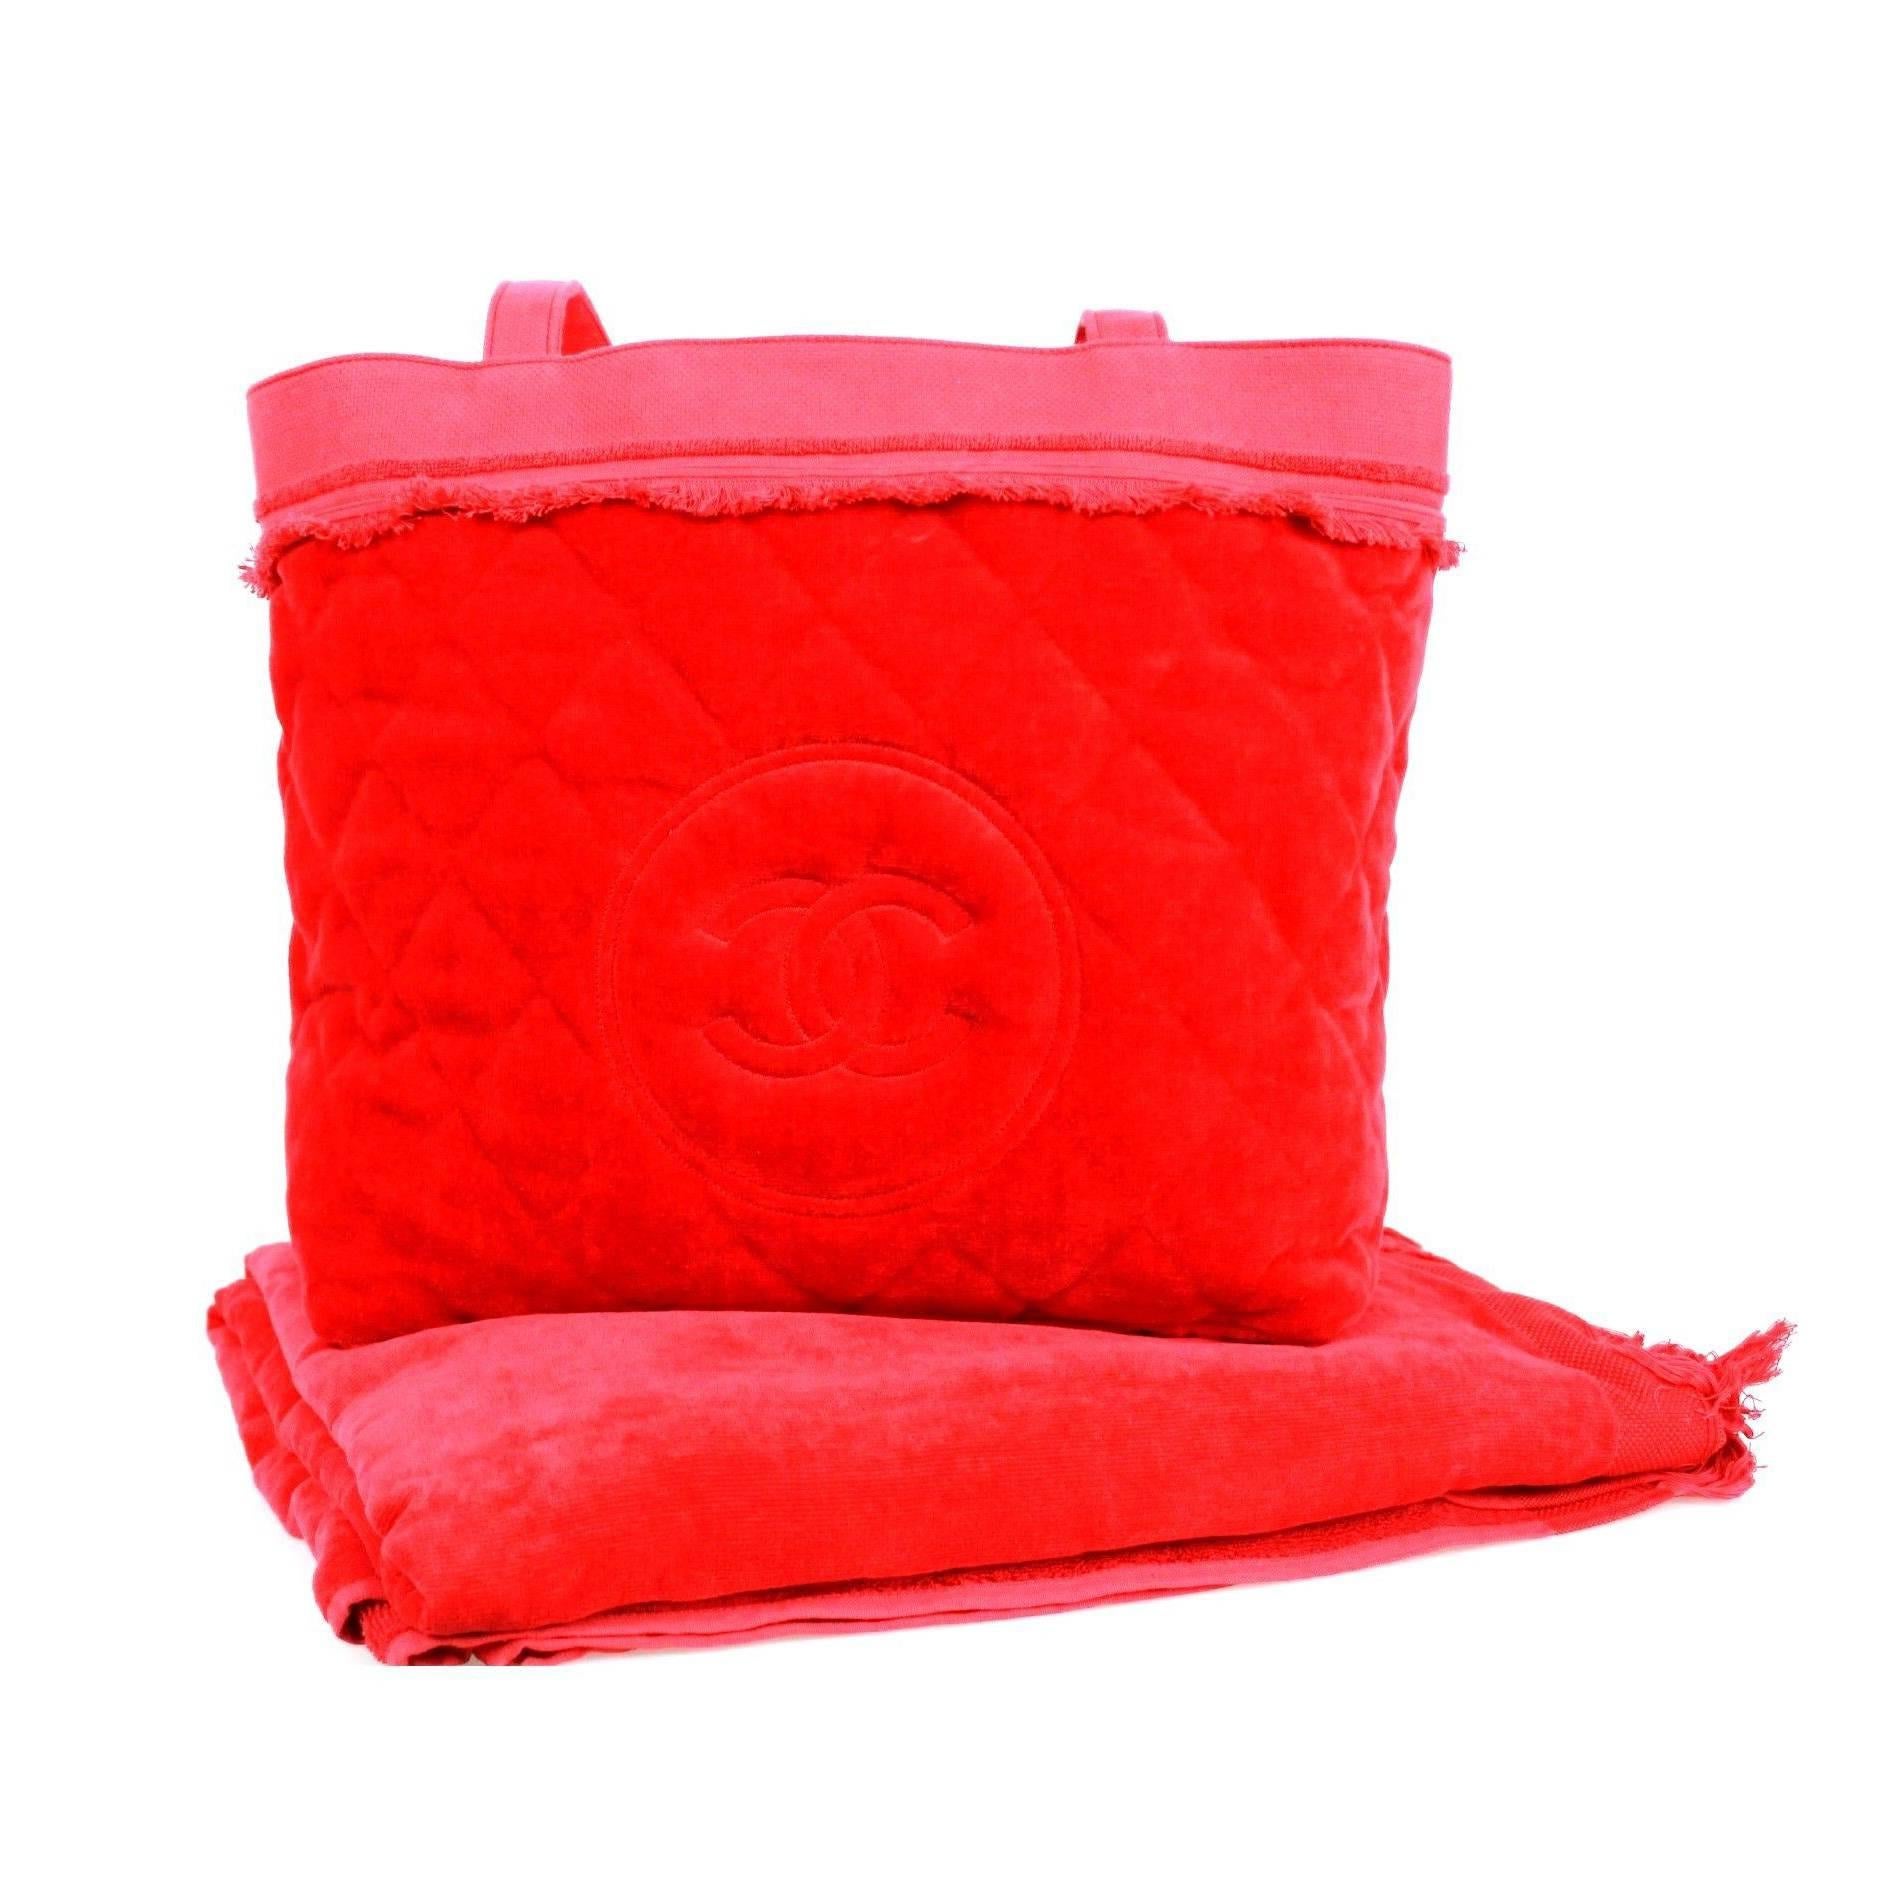 Chanel Candy Red Quilted 100% Cotton 2015 Cc Logo Beach Towel Bag For Sale